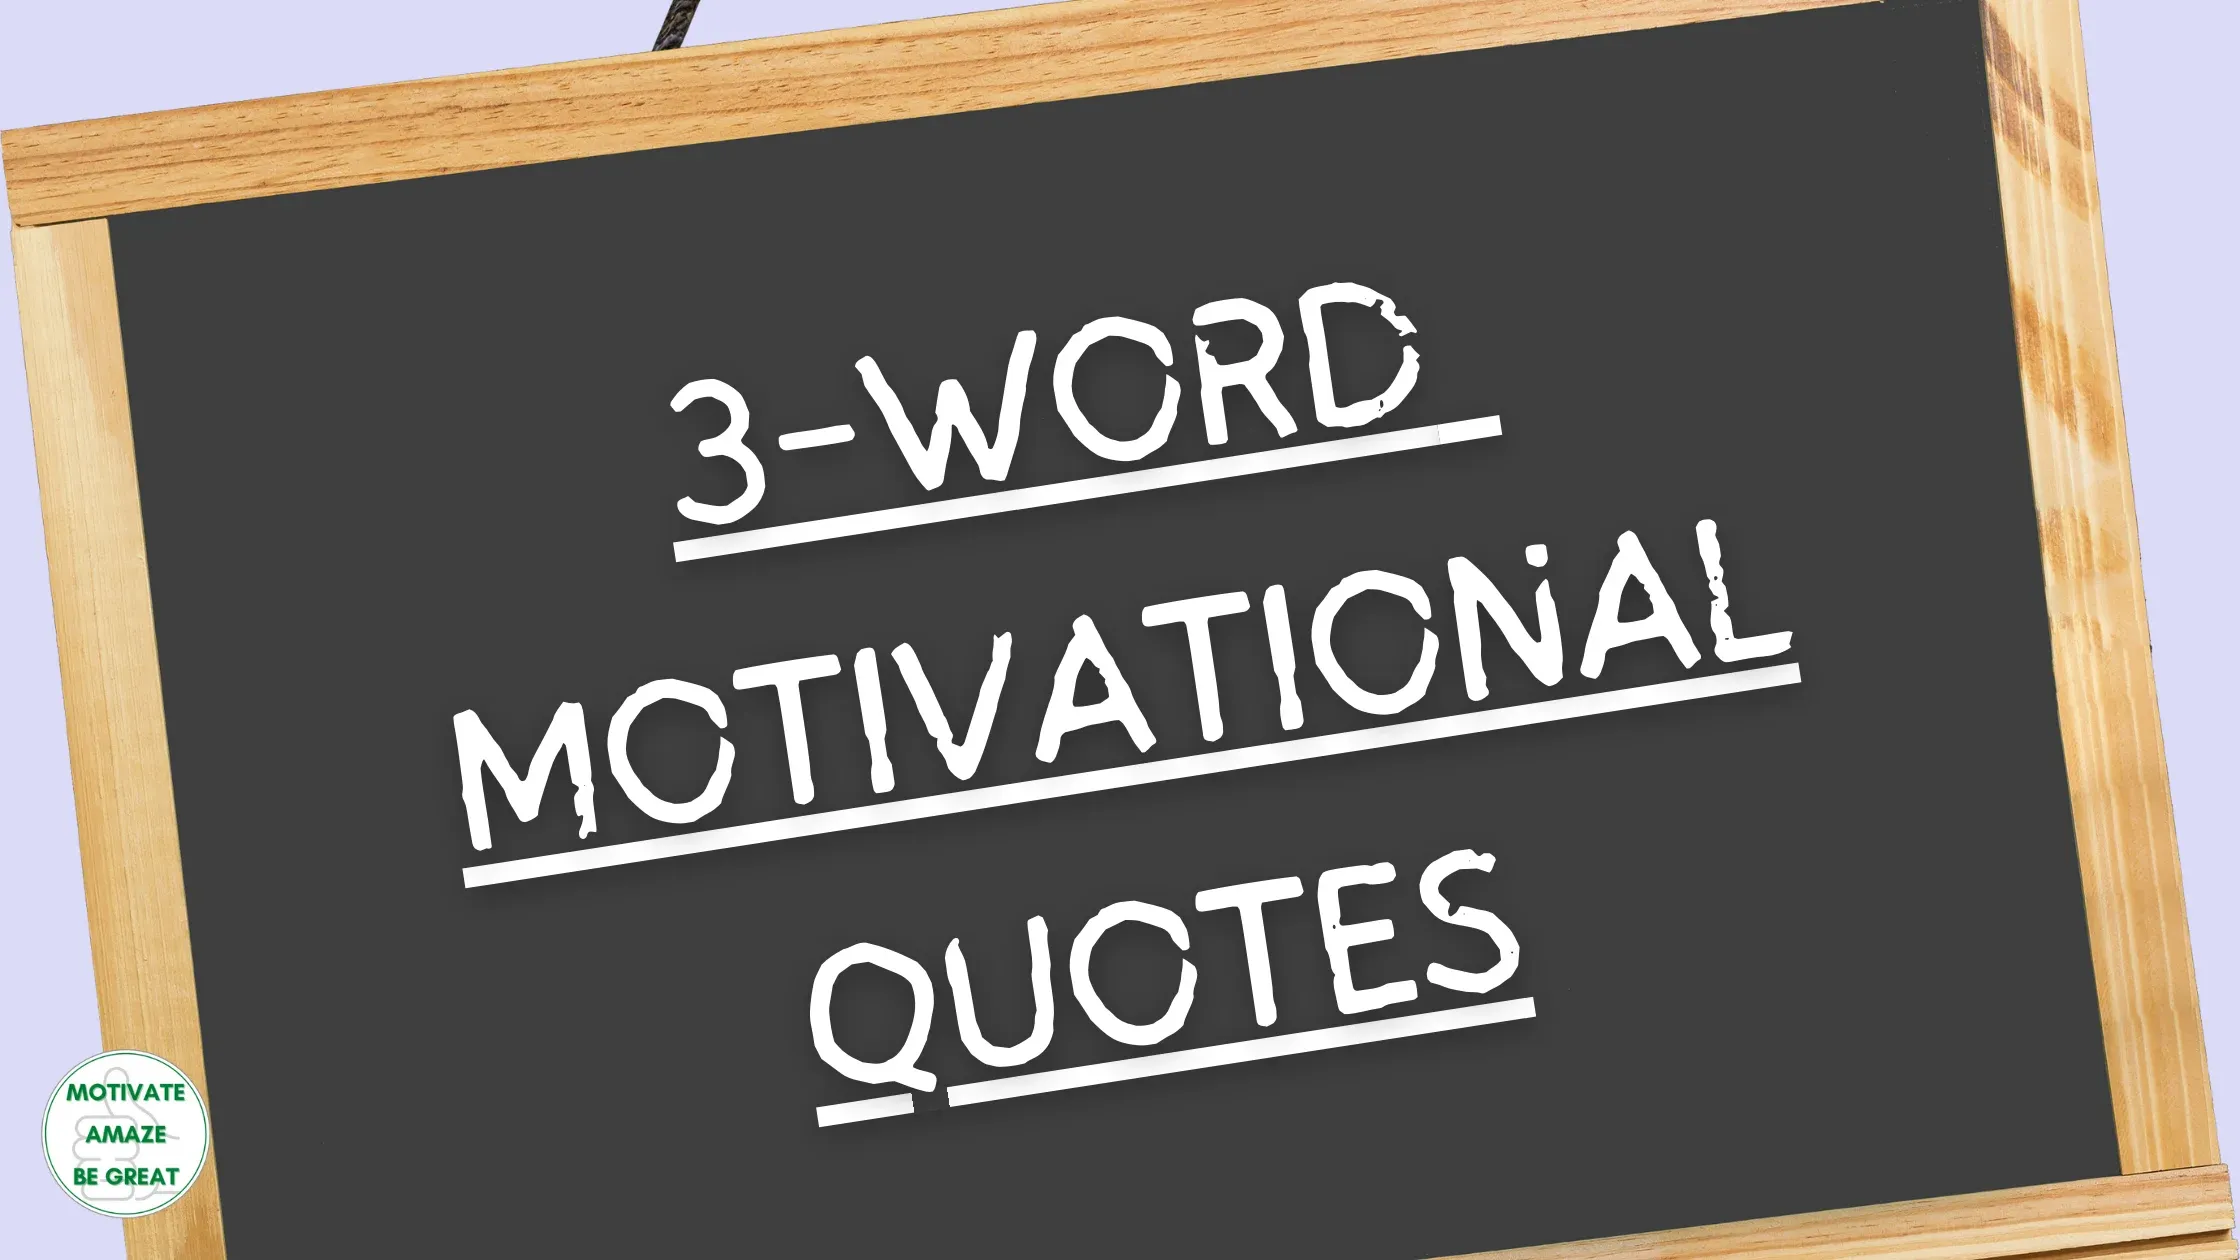 Header image of the article: "Three-Word Motivational Quotes"